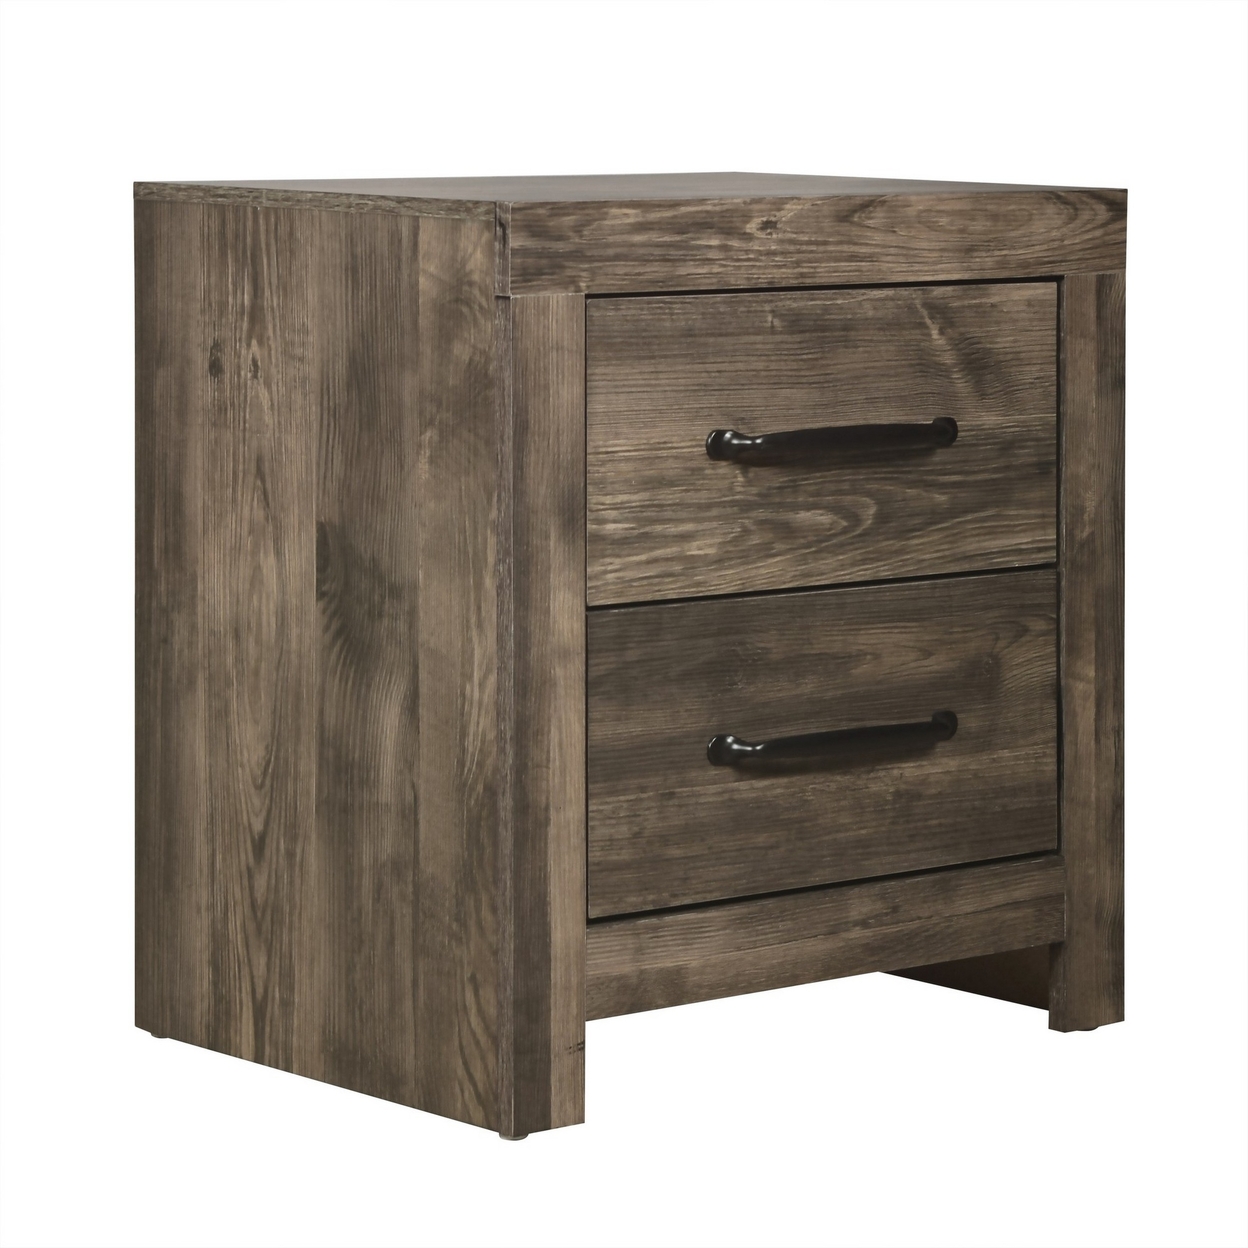 Ent 24 Inch Nightstand, 2 Drawers With Black Handles, Greige Brown Finish -Saltoro Sherpi